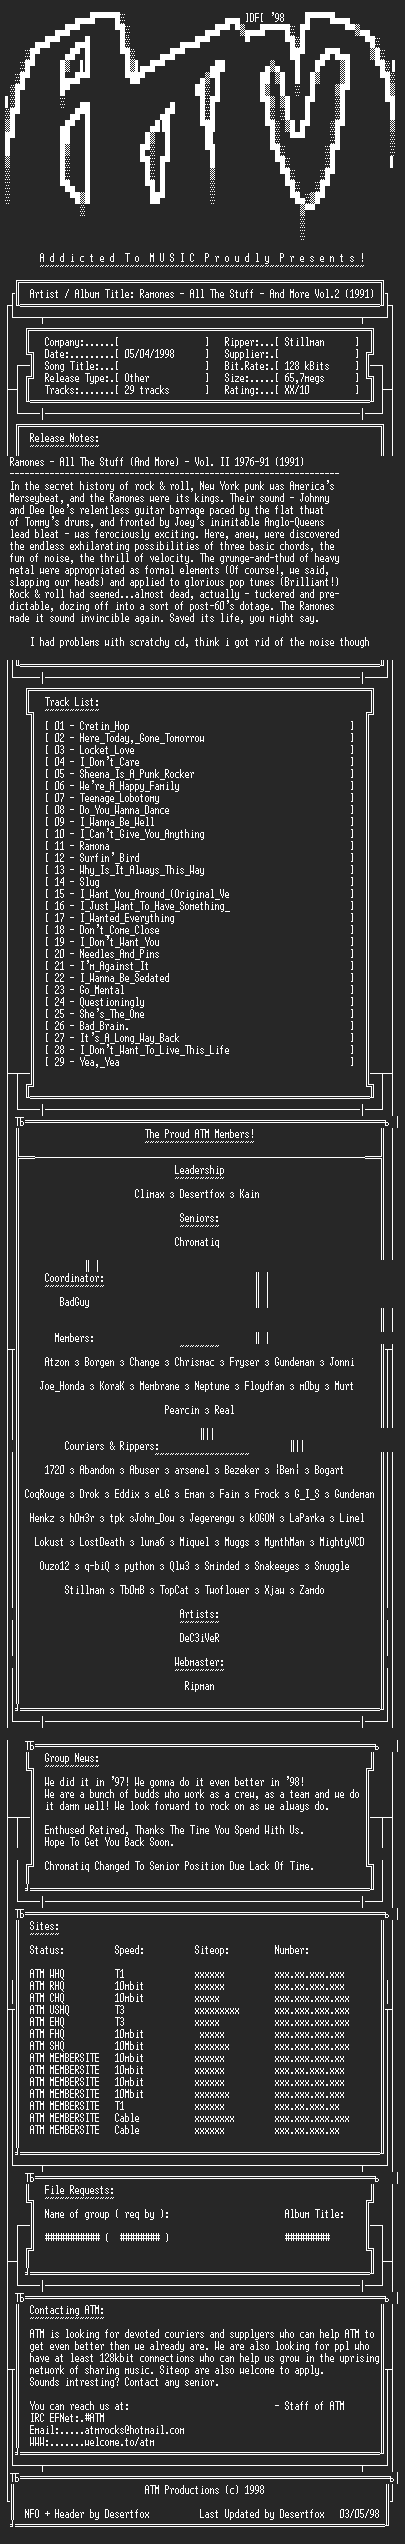 NFO file for Ramones_-_All_The_Stuff-And_More_Vol.2_(1991)-ATM